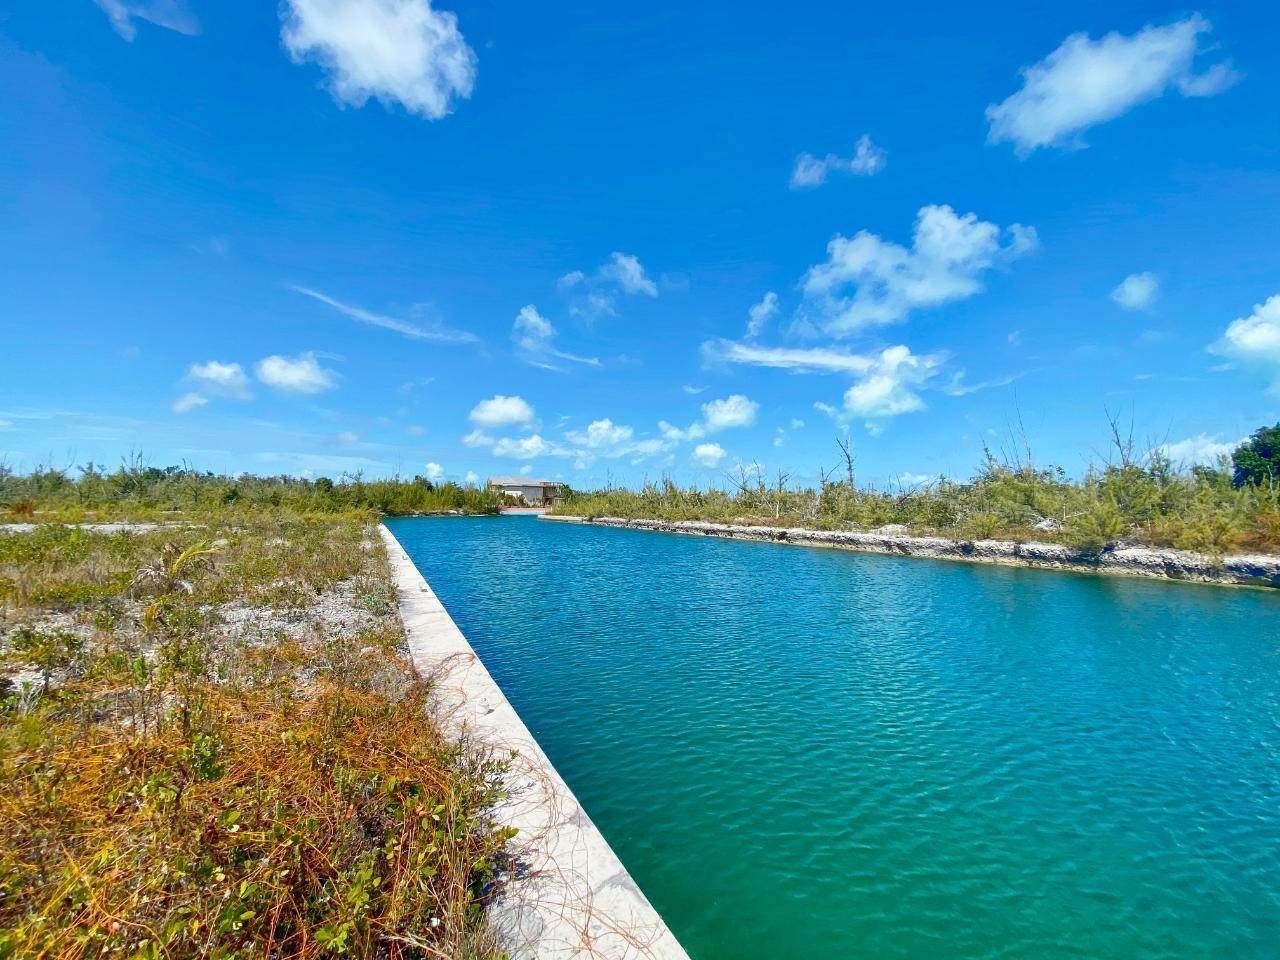 4. Land for Sale at Leisure Lee, Abaco Bahamas